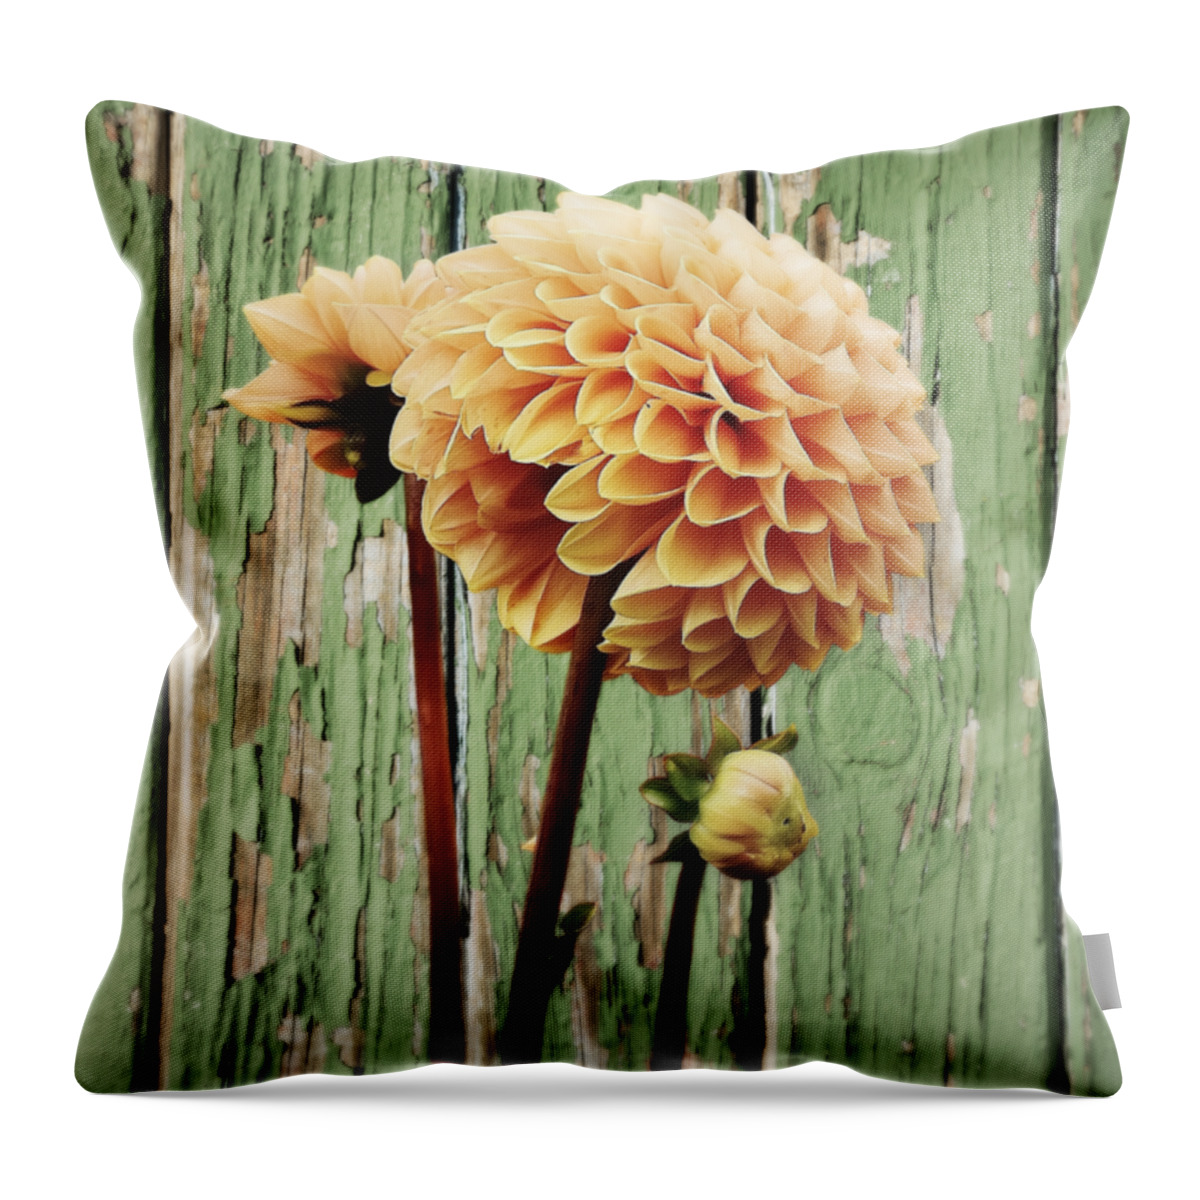 Flower Throw Pillow featuring the photograph Floral Delight by Ally White